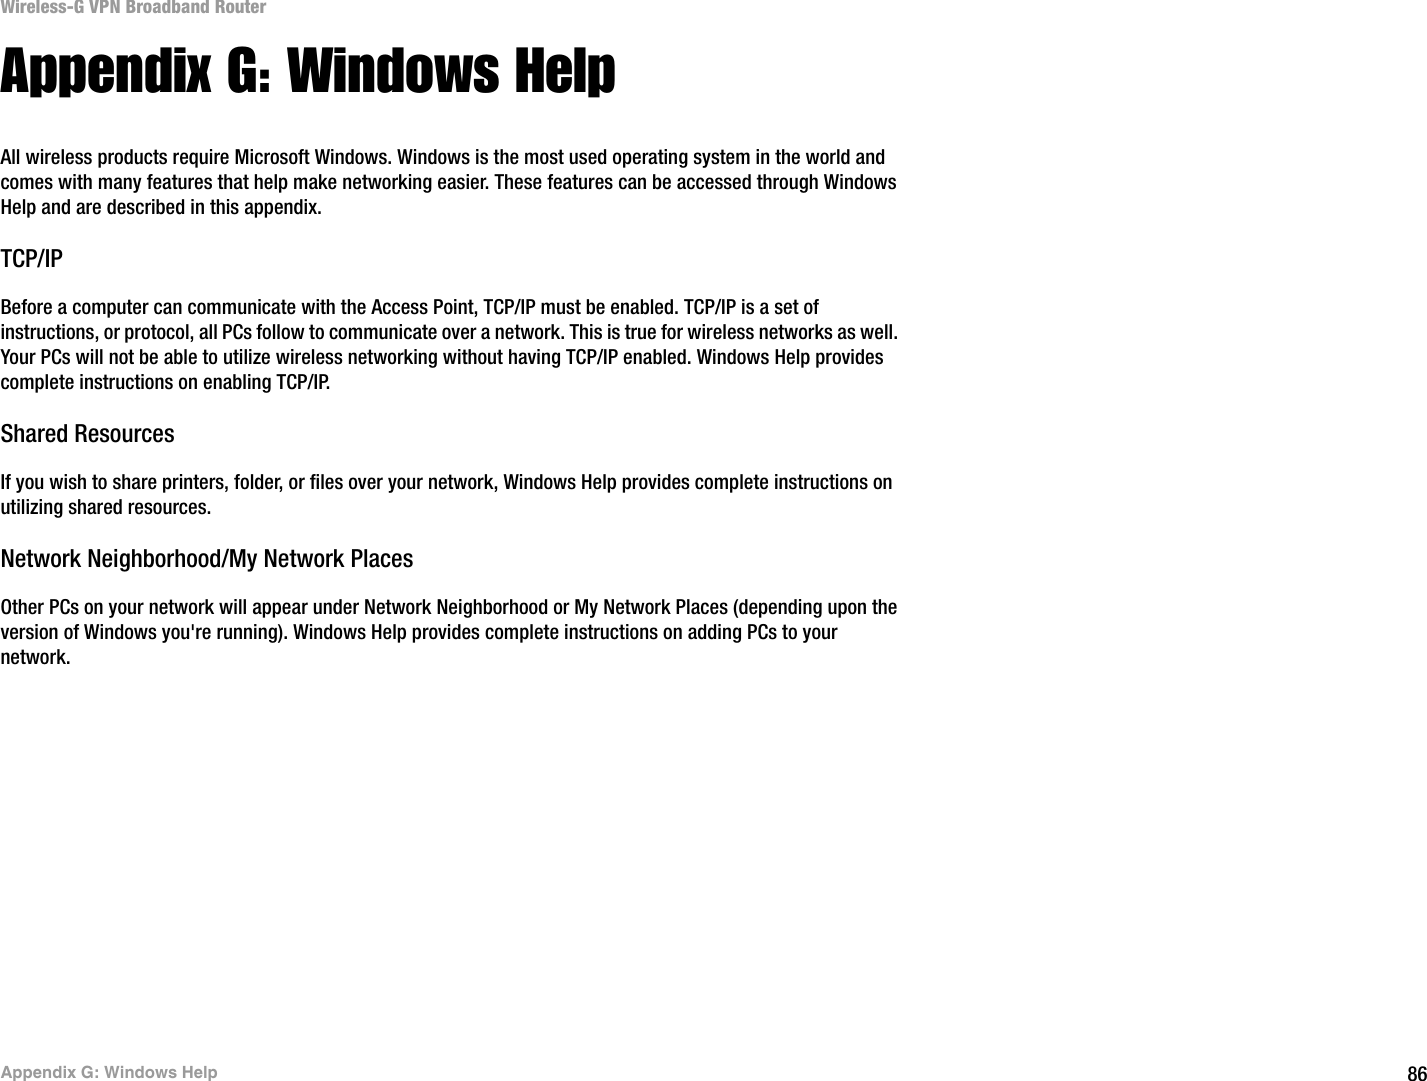 86Appendix G: Windows HelpWireless-G VPN Broadband RouterAppendix G: Windows HelpAll wireless products require Microsoft Windows. Windows is the most used operating system in the world and comes with many features that help make networking easier. These features can be accessed through Windows Help and are described in this appendix.TCP/IPBefore a computer can communicate with the Access Point, TCP/IP must be enabled. TCP/IP is a set of instructions, or protocol, all PCs follow to communicate over a network. This is true for wireless networks as well. Your PCs will not be able to utilize wireless networking without having TCP/IP enabled. Windows Help provides complete instructions on enabling TCP/IP.Shared ResourcesIf you wish to share printers, folder, or files over your network, Windows Help provides complete instructions on utilizing shared resources.Network Neighborhood/My Network PlacesOther PCs on your network will appear under Network Neighborhood or My Network Places (depending upon the version of Windows you&apos;re running). Windows Help provides complete instructions on adding PCs to your network.